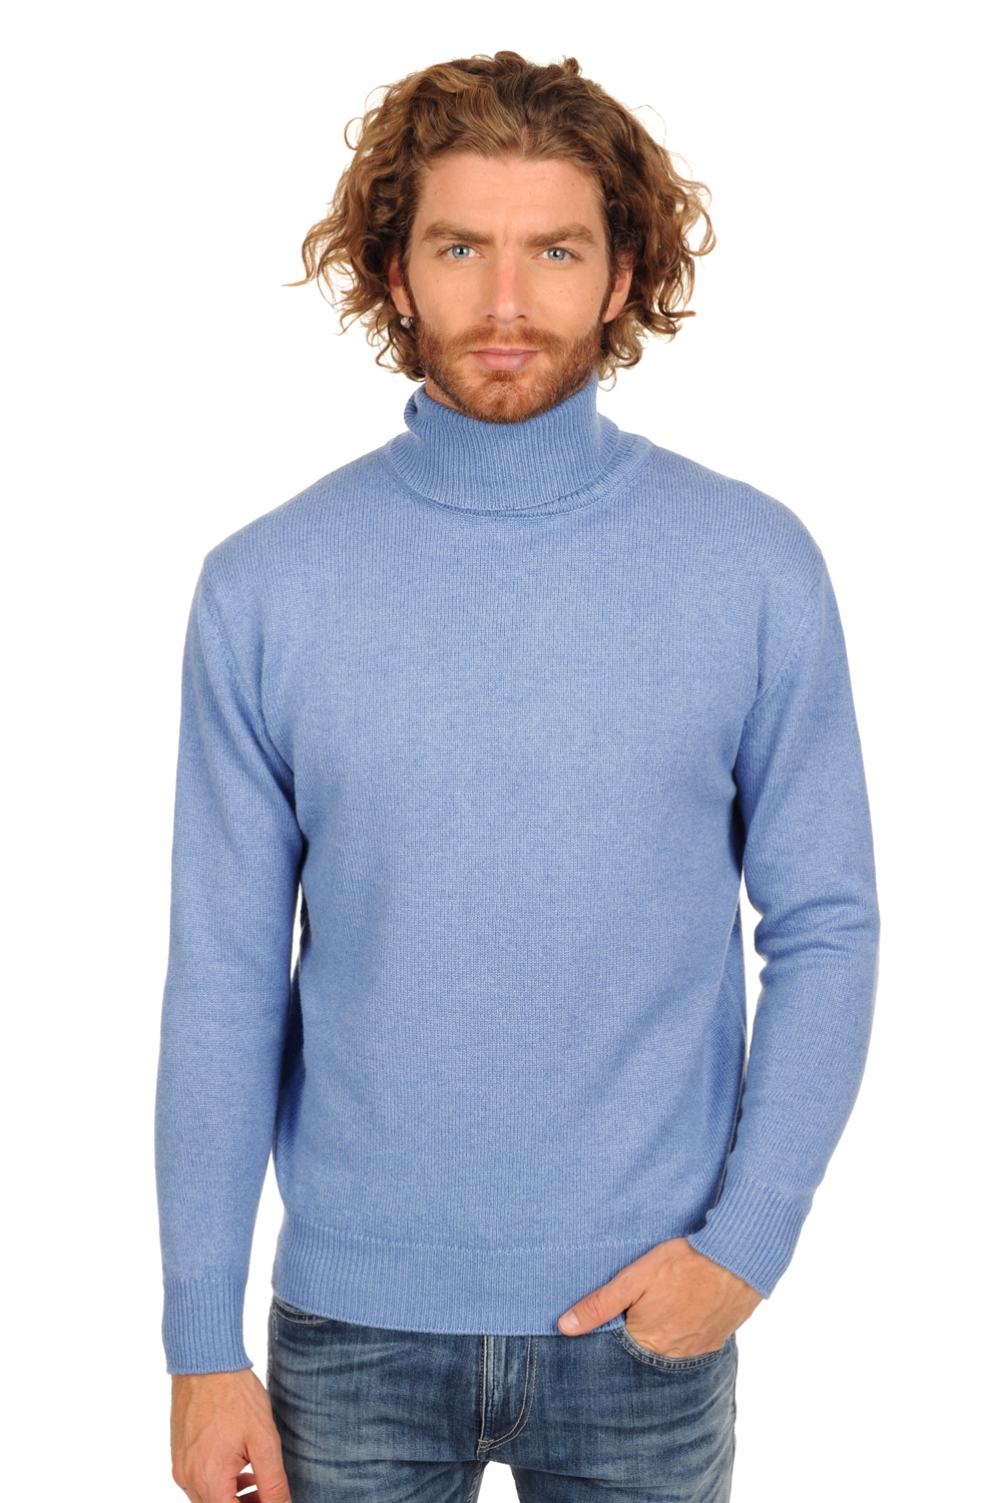 Cachemire pull homme col roule edgar 4f bleu chine s